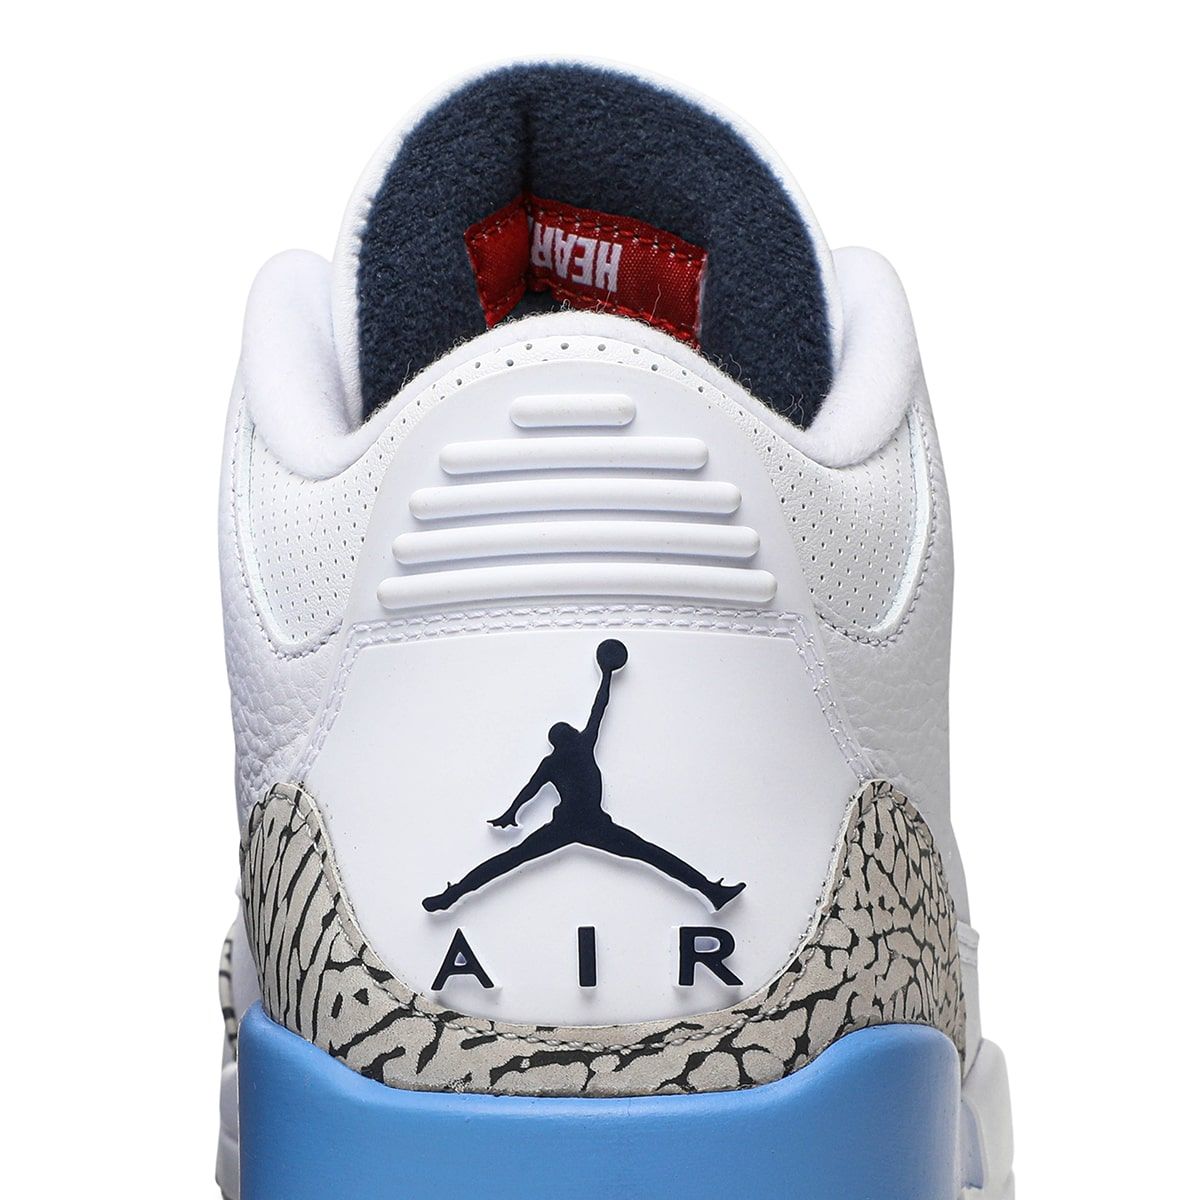 Where To Buy The Air Jordan 3 Unc House Of Heat